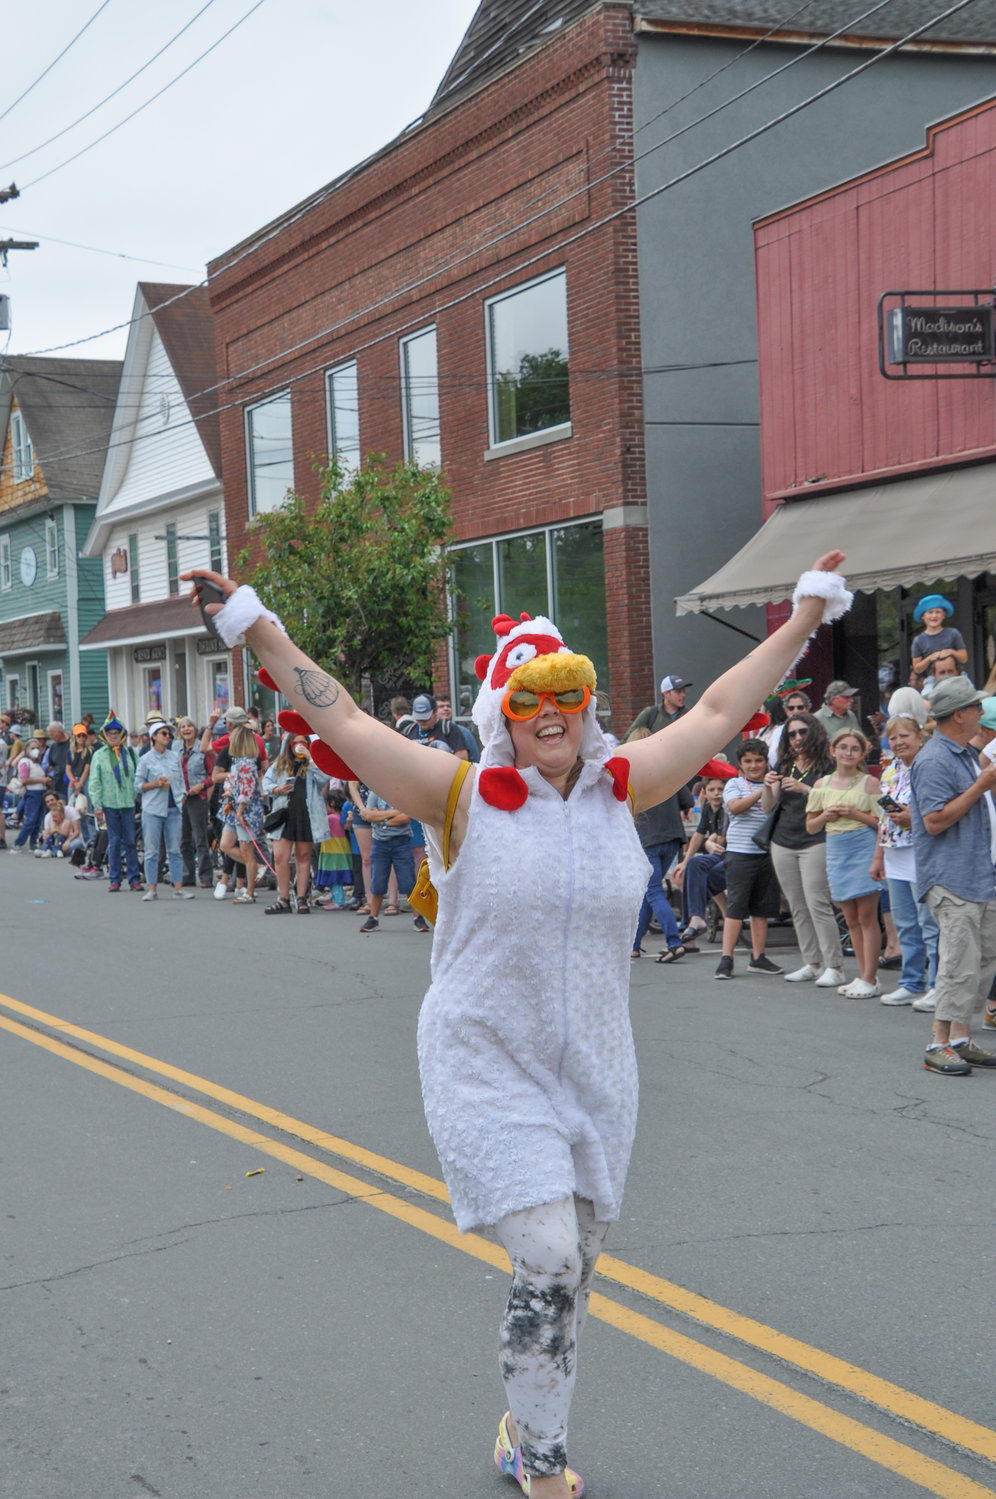 I had to look twice, but I think that was a chicken at the Livingston Manor Trout Parade, where (apparently) anything goes.